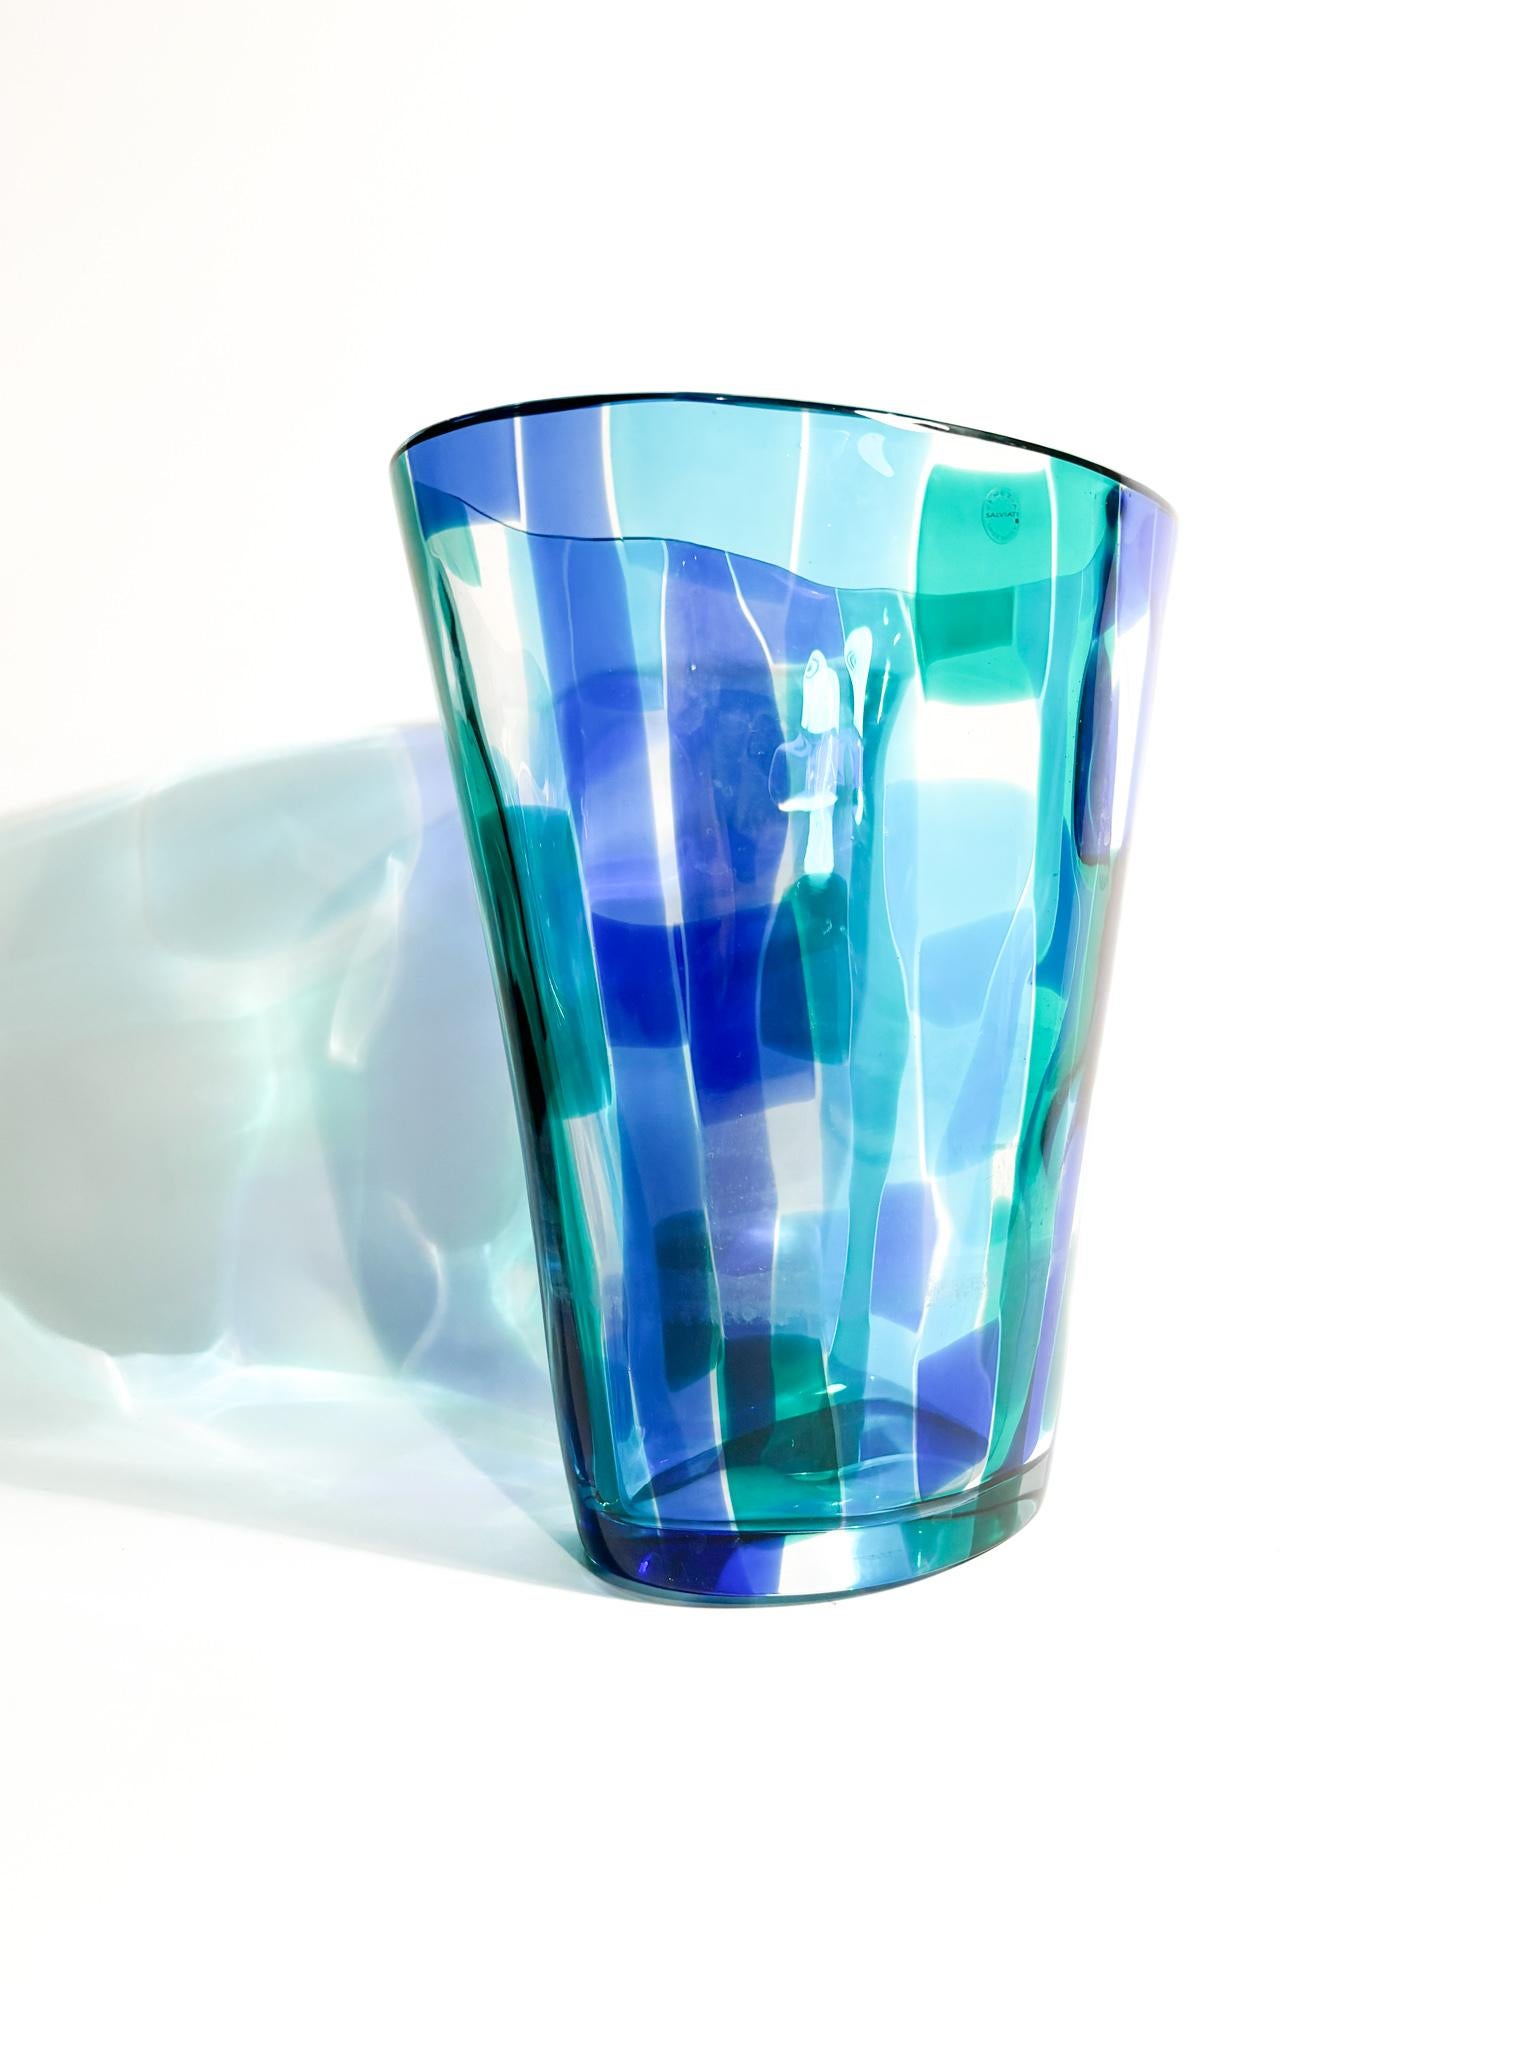 Murano glass vase with blue and green shades, Madras Collection, made by Vetreria Salviati in 1997

Ø 22 cm Ø 15 cm h 26 cm

Salviati is a renowned glass company based in Murano, Italy. The company was founded in 1859 by Antonio Salviati and is